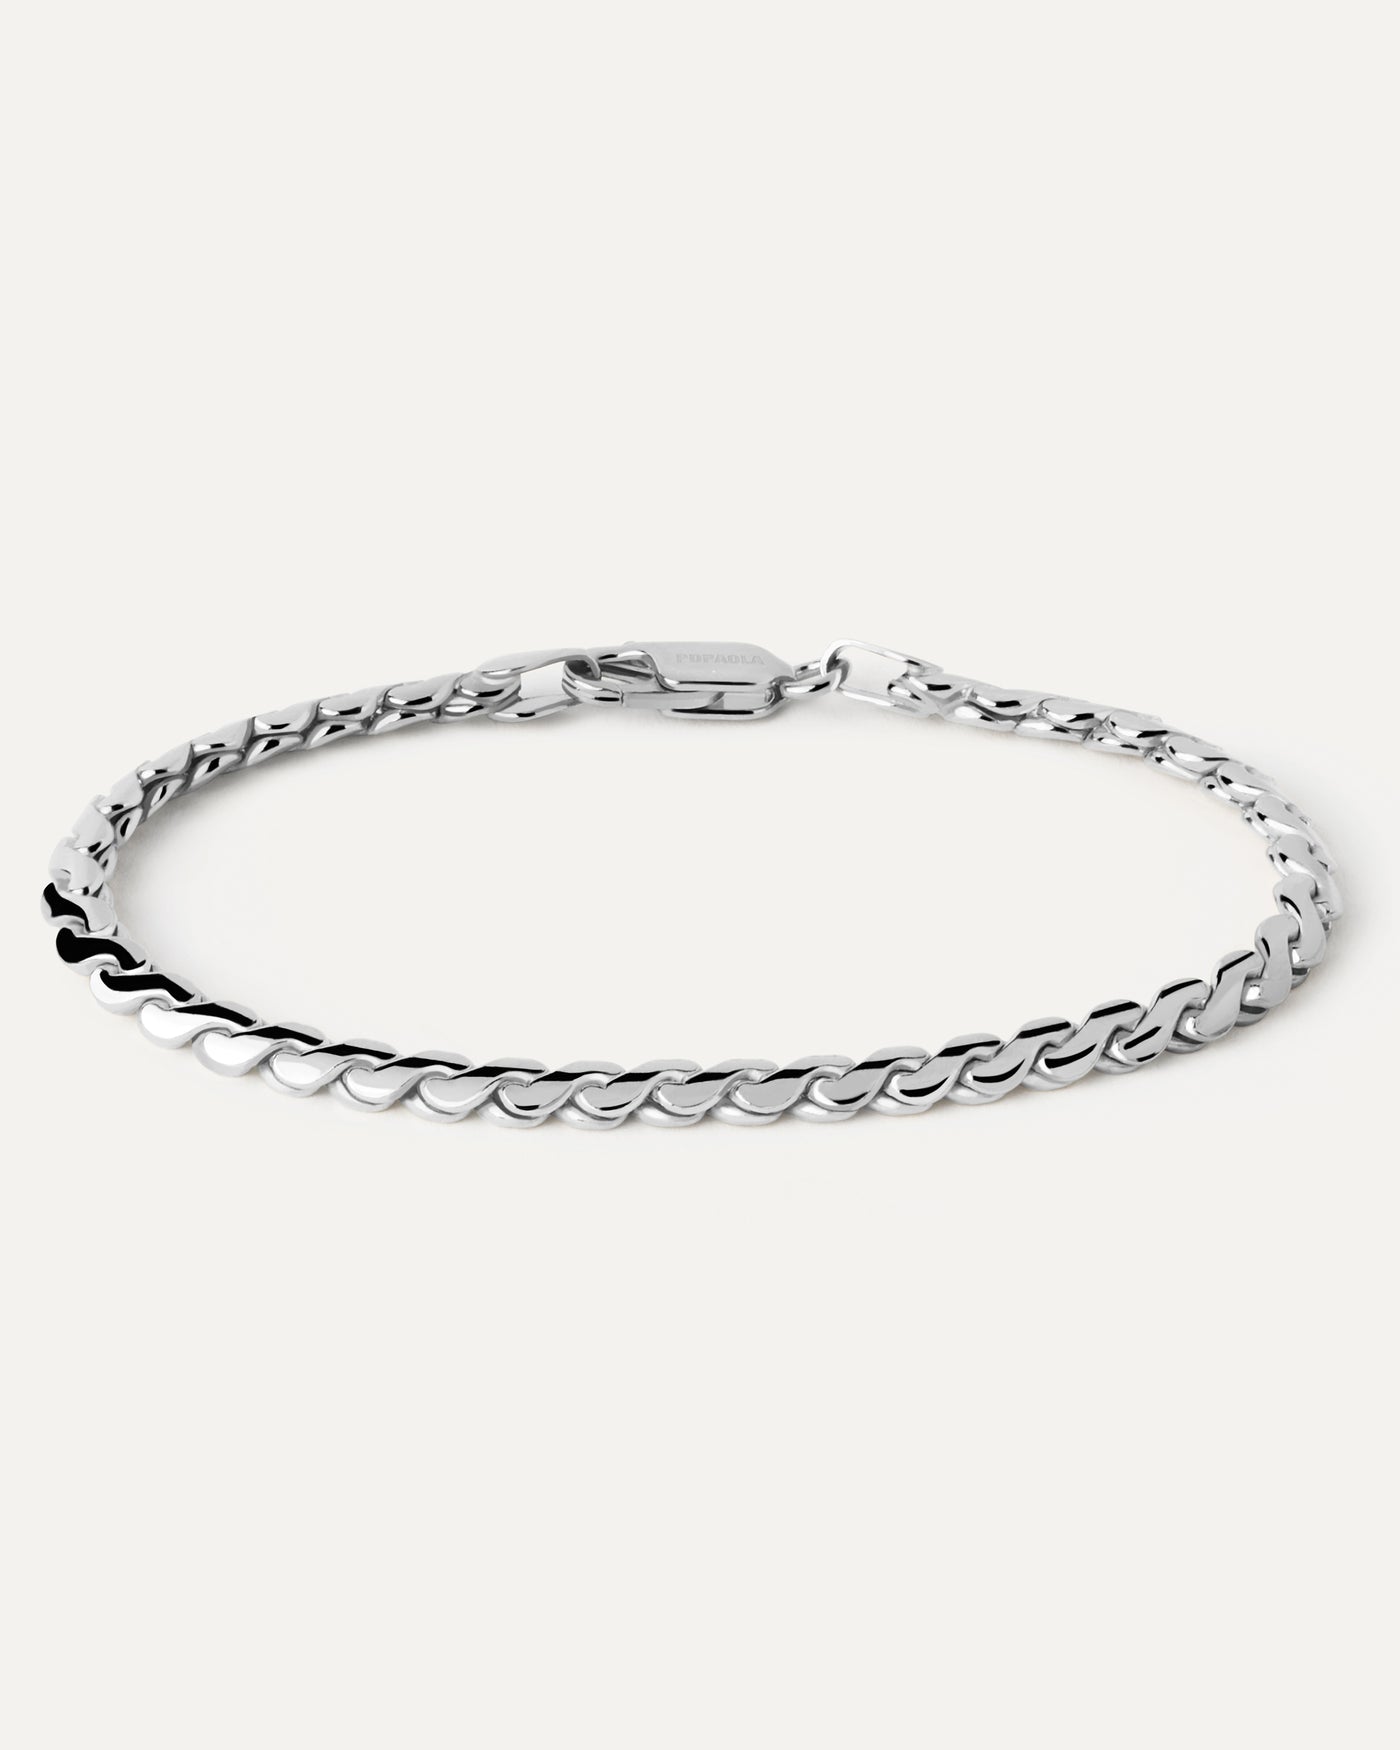 2023 Selection | Large Serpentine Silver Chain Bracelet. Modern serpentine silver thick chain bracelet with braided links. Get the latest arrival from PDPAOLA. Place your order safely and get this Best Seller. Free Shipping.